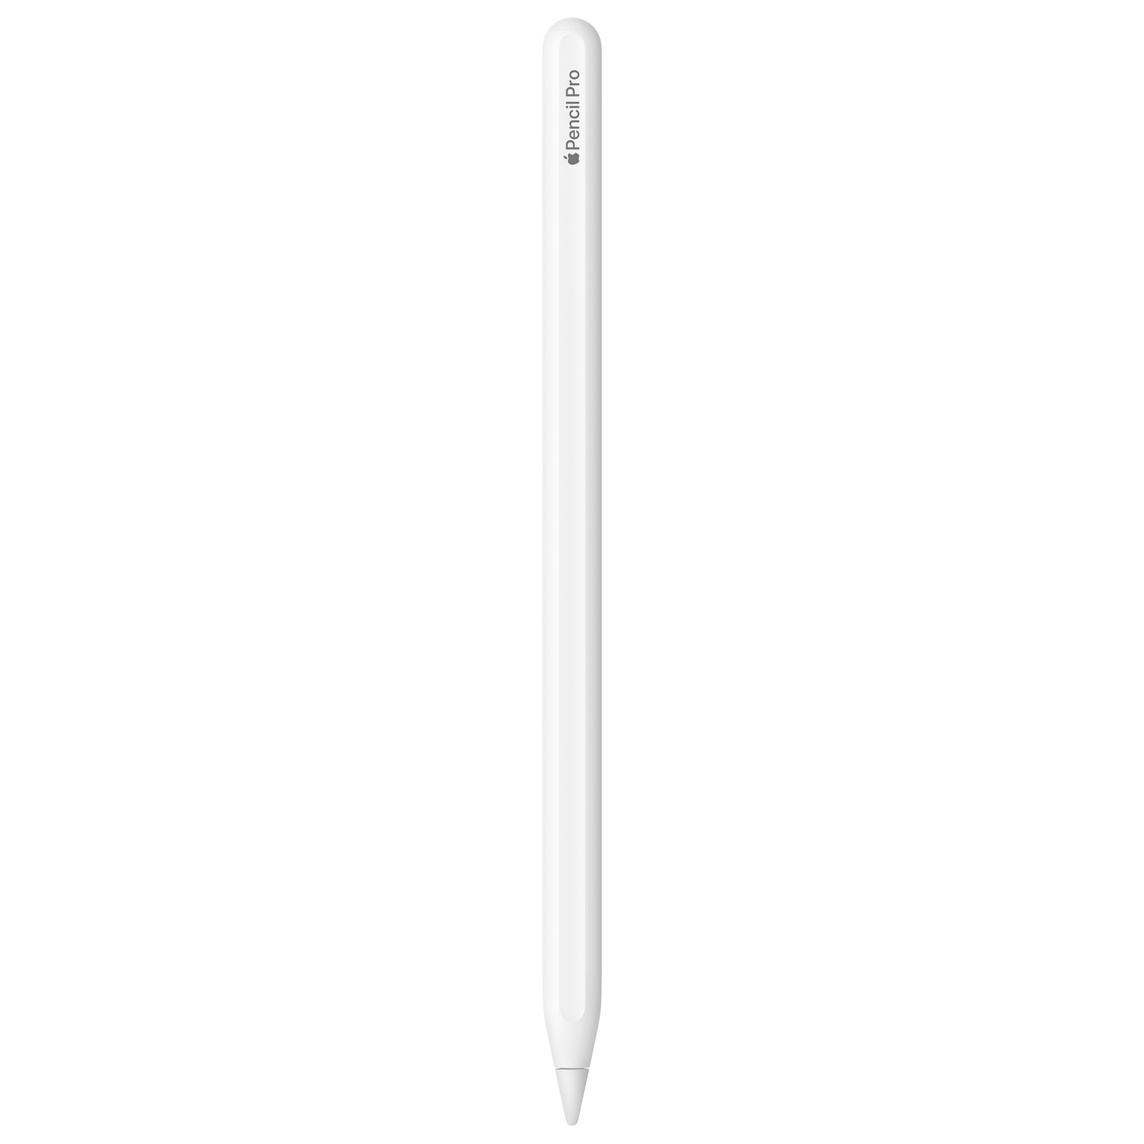 Apple Pencil Pro, White, engraving reads, Apple Pencil Pro, the word Apple represented by an Apple logo